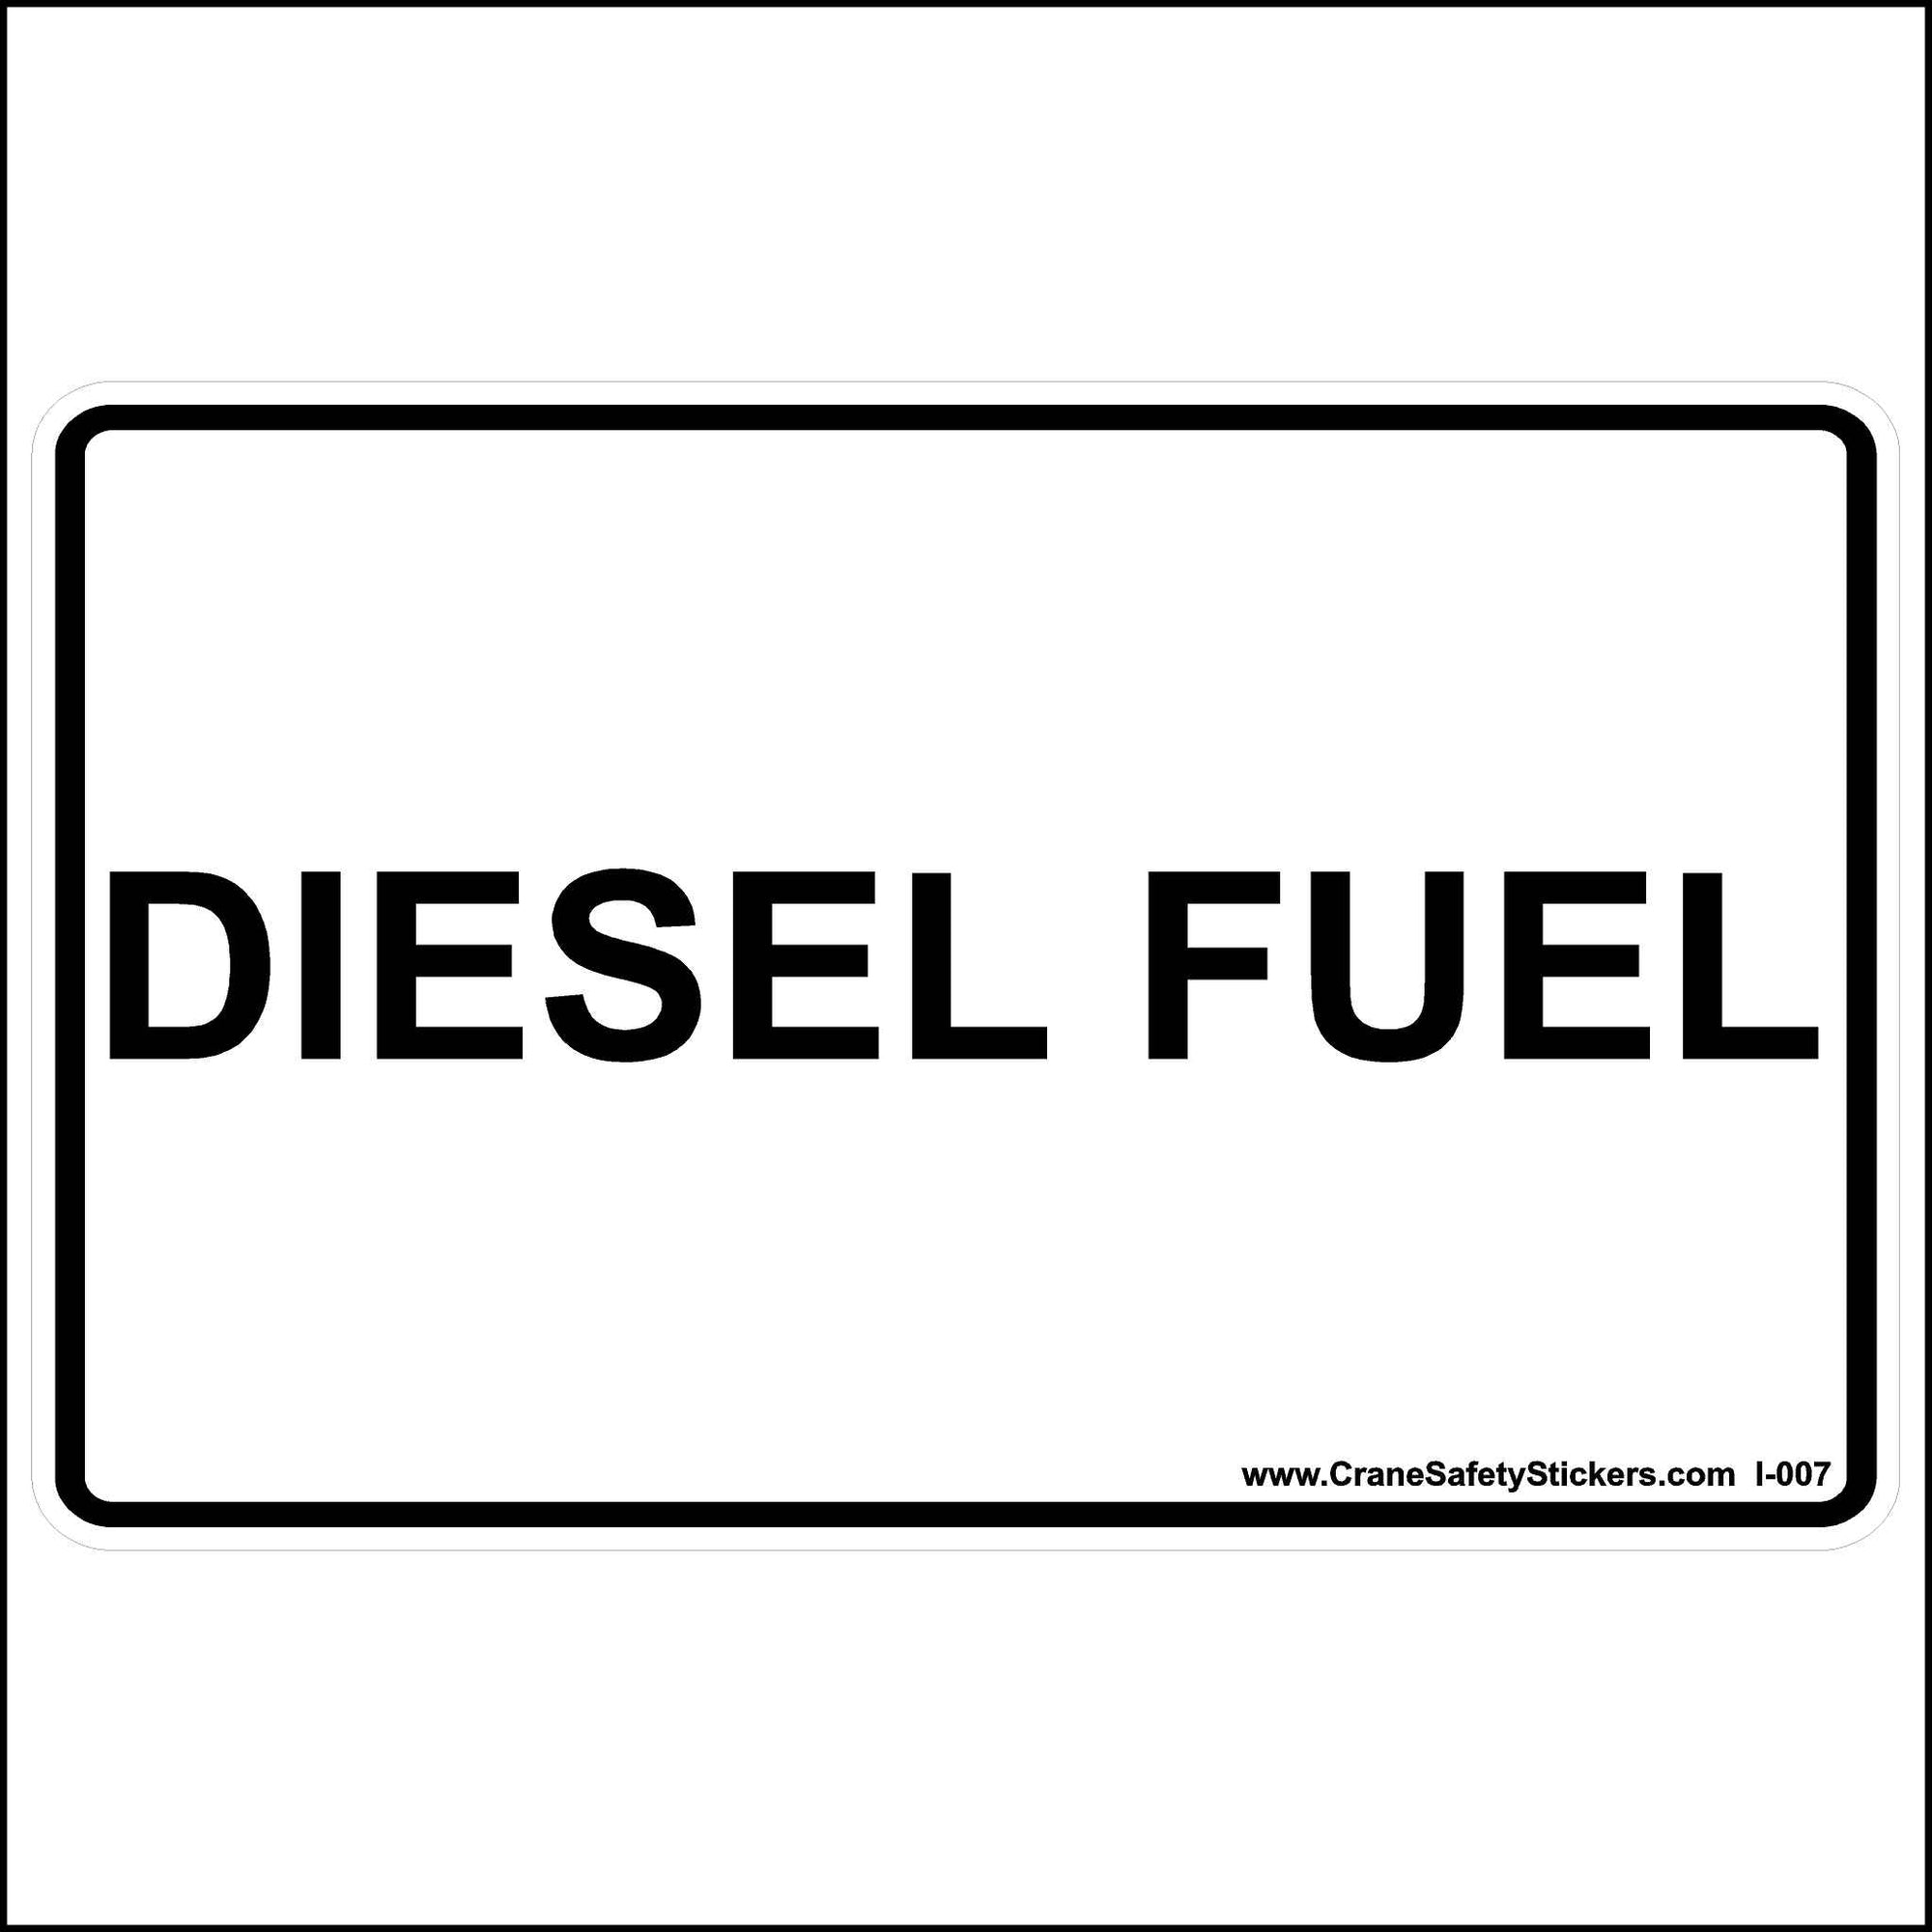 Diesel Fuel Sticker printed with black letters on white background.